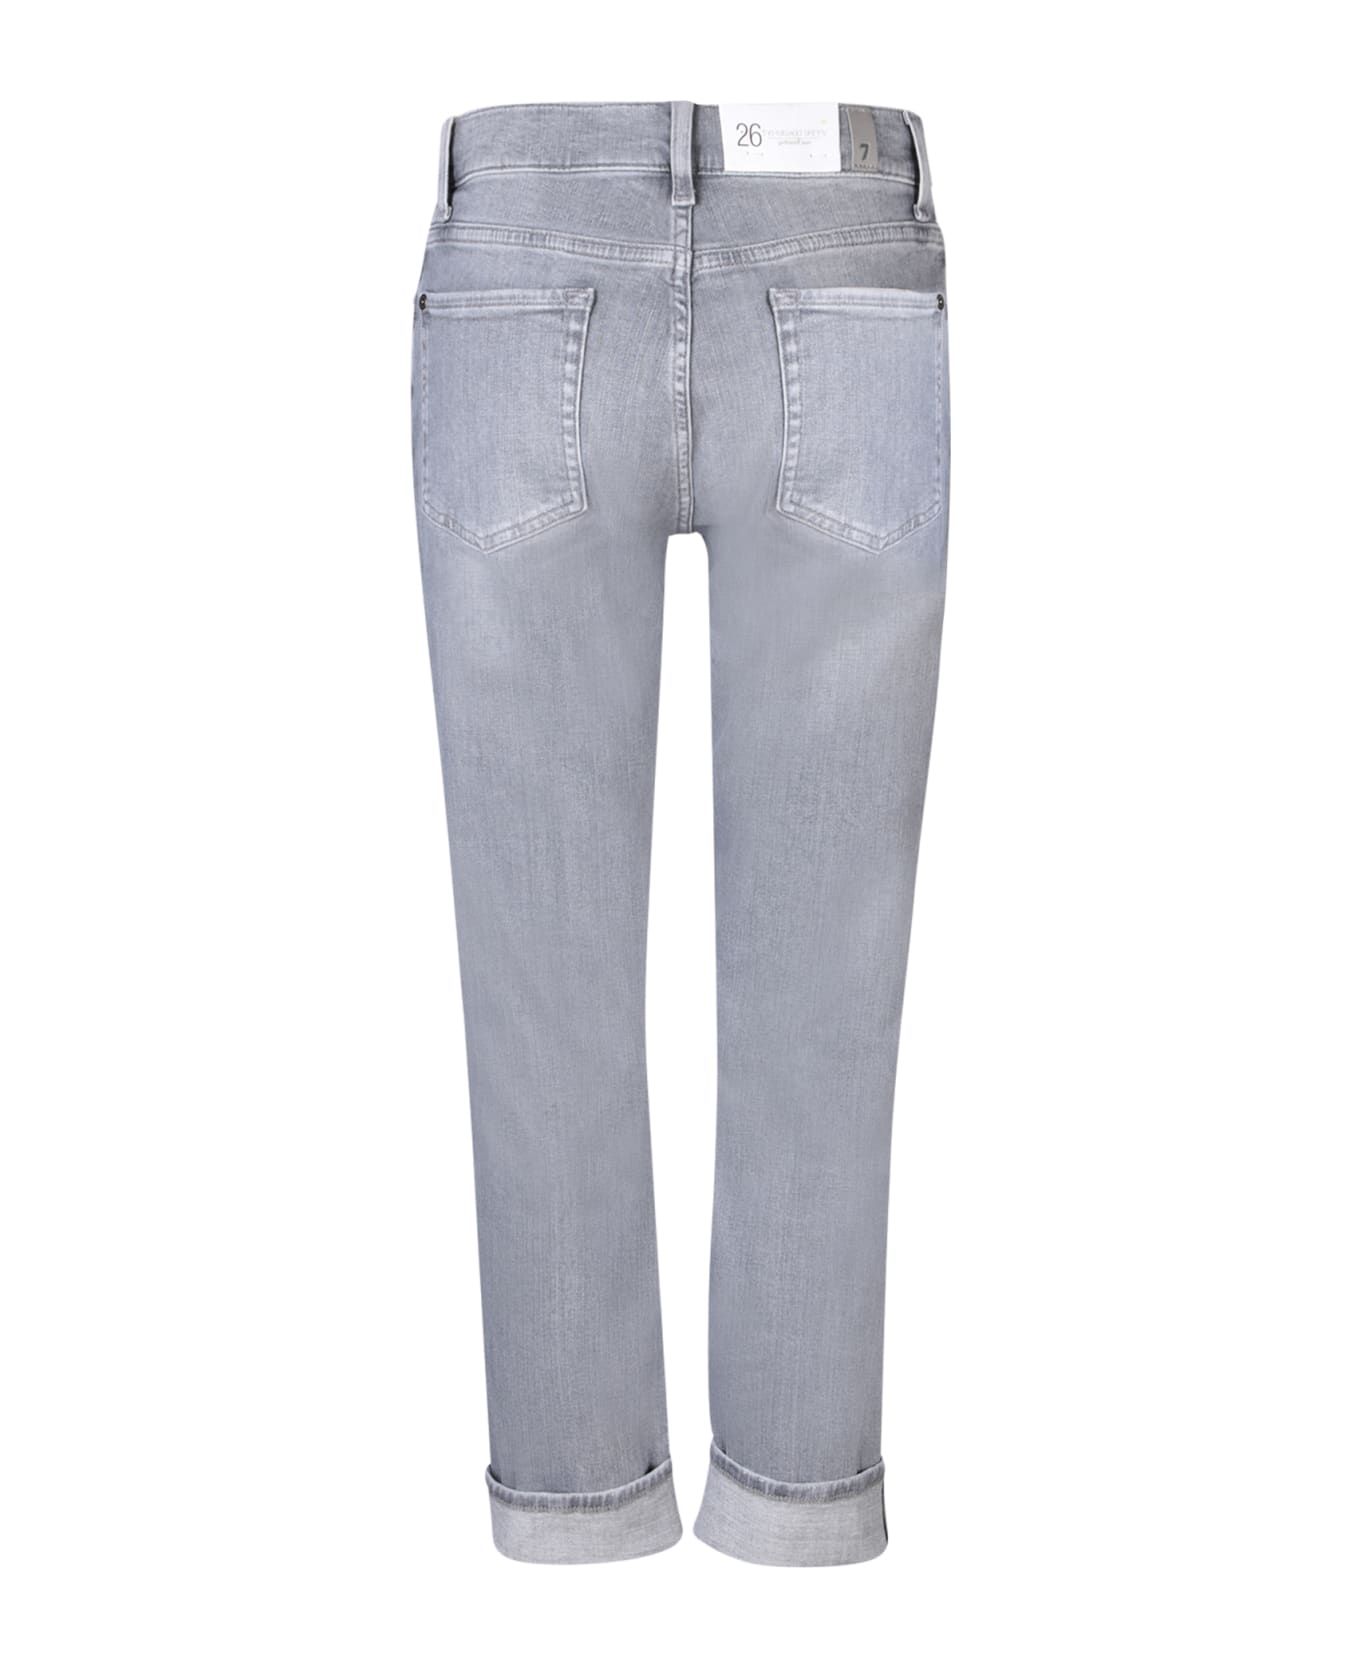 7 For All Mankind Relaxed Skinny Grey Jeans - Grey